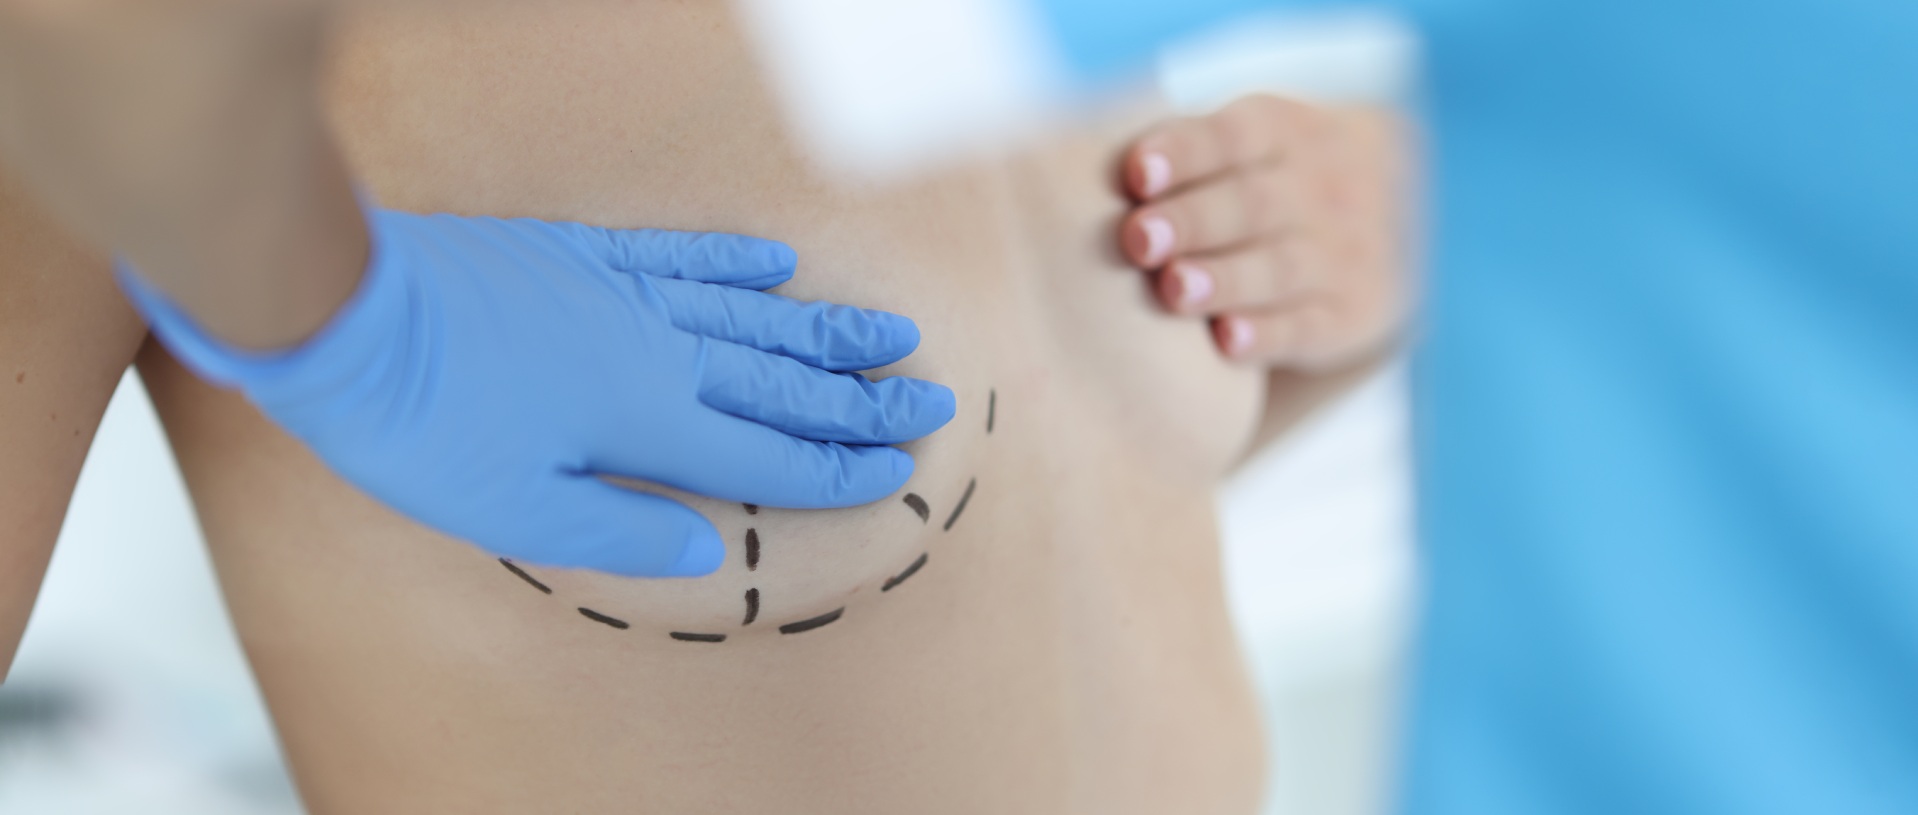 plastic surgery breast augmentation and lift concept